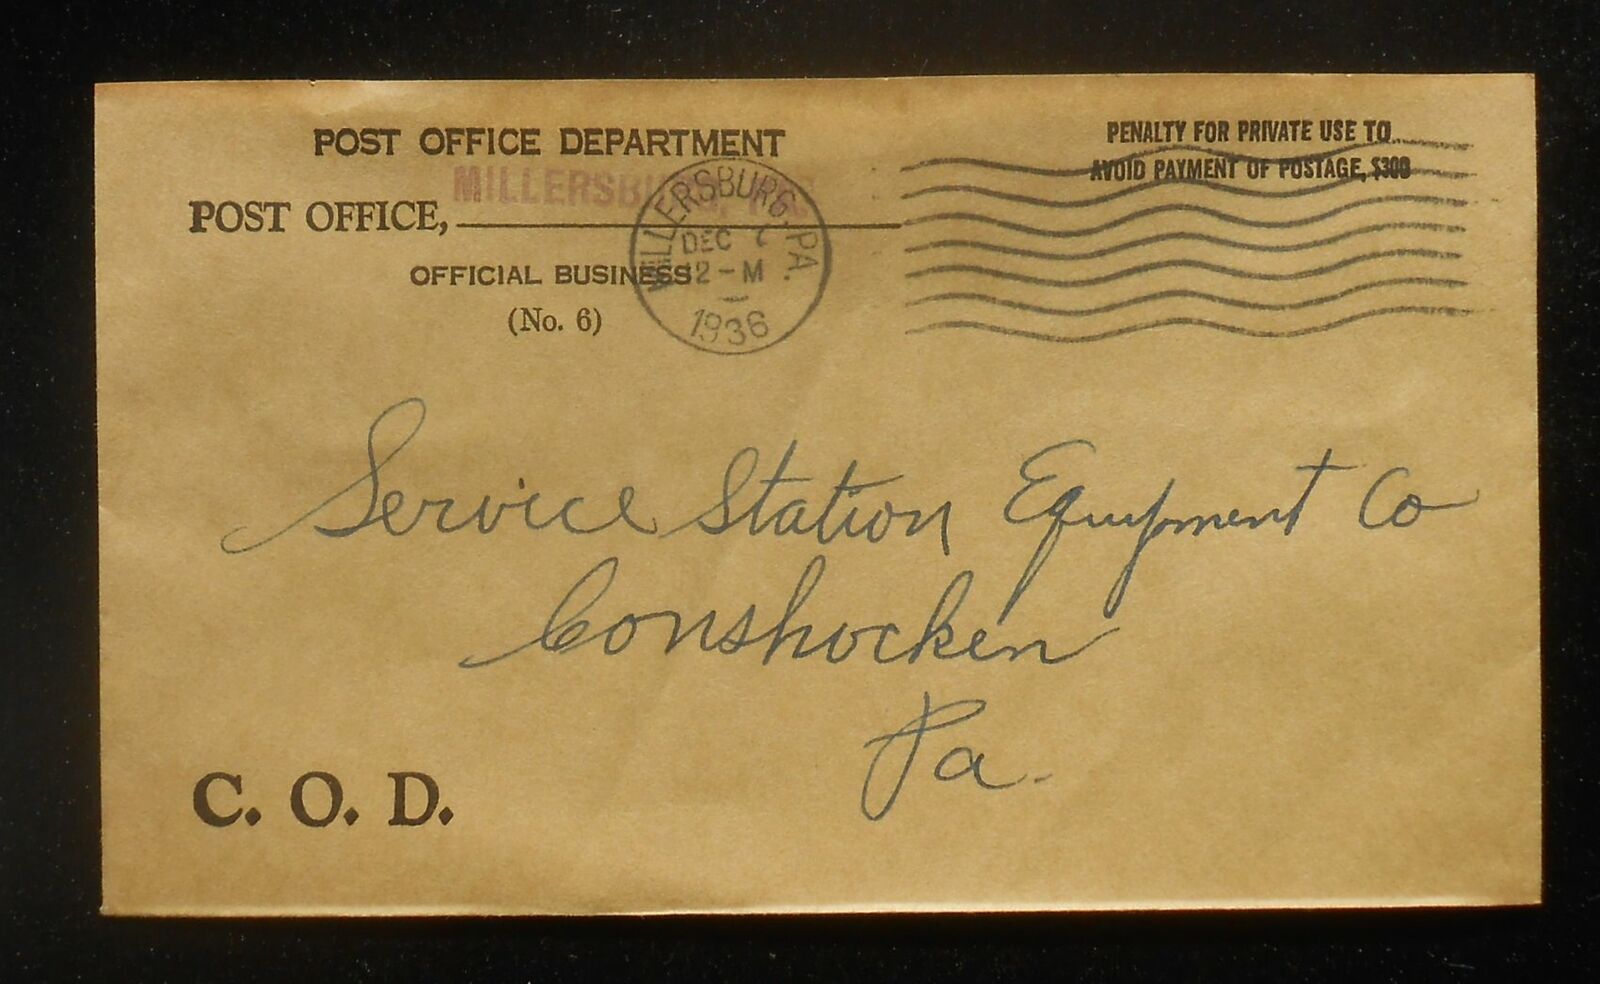 1936 POSTAL HISTORY Post Office Official Business C. O. D. Millersburg PA Cover